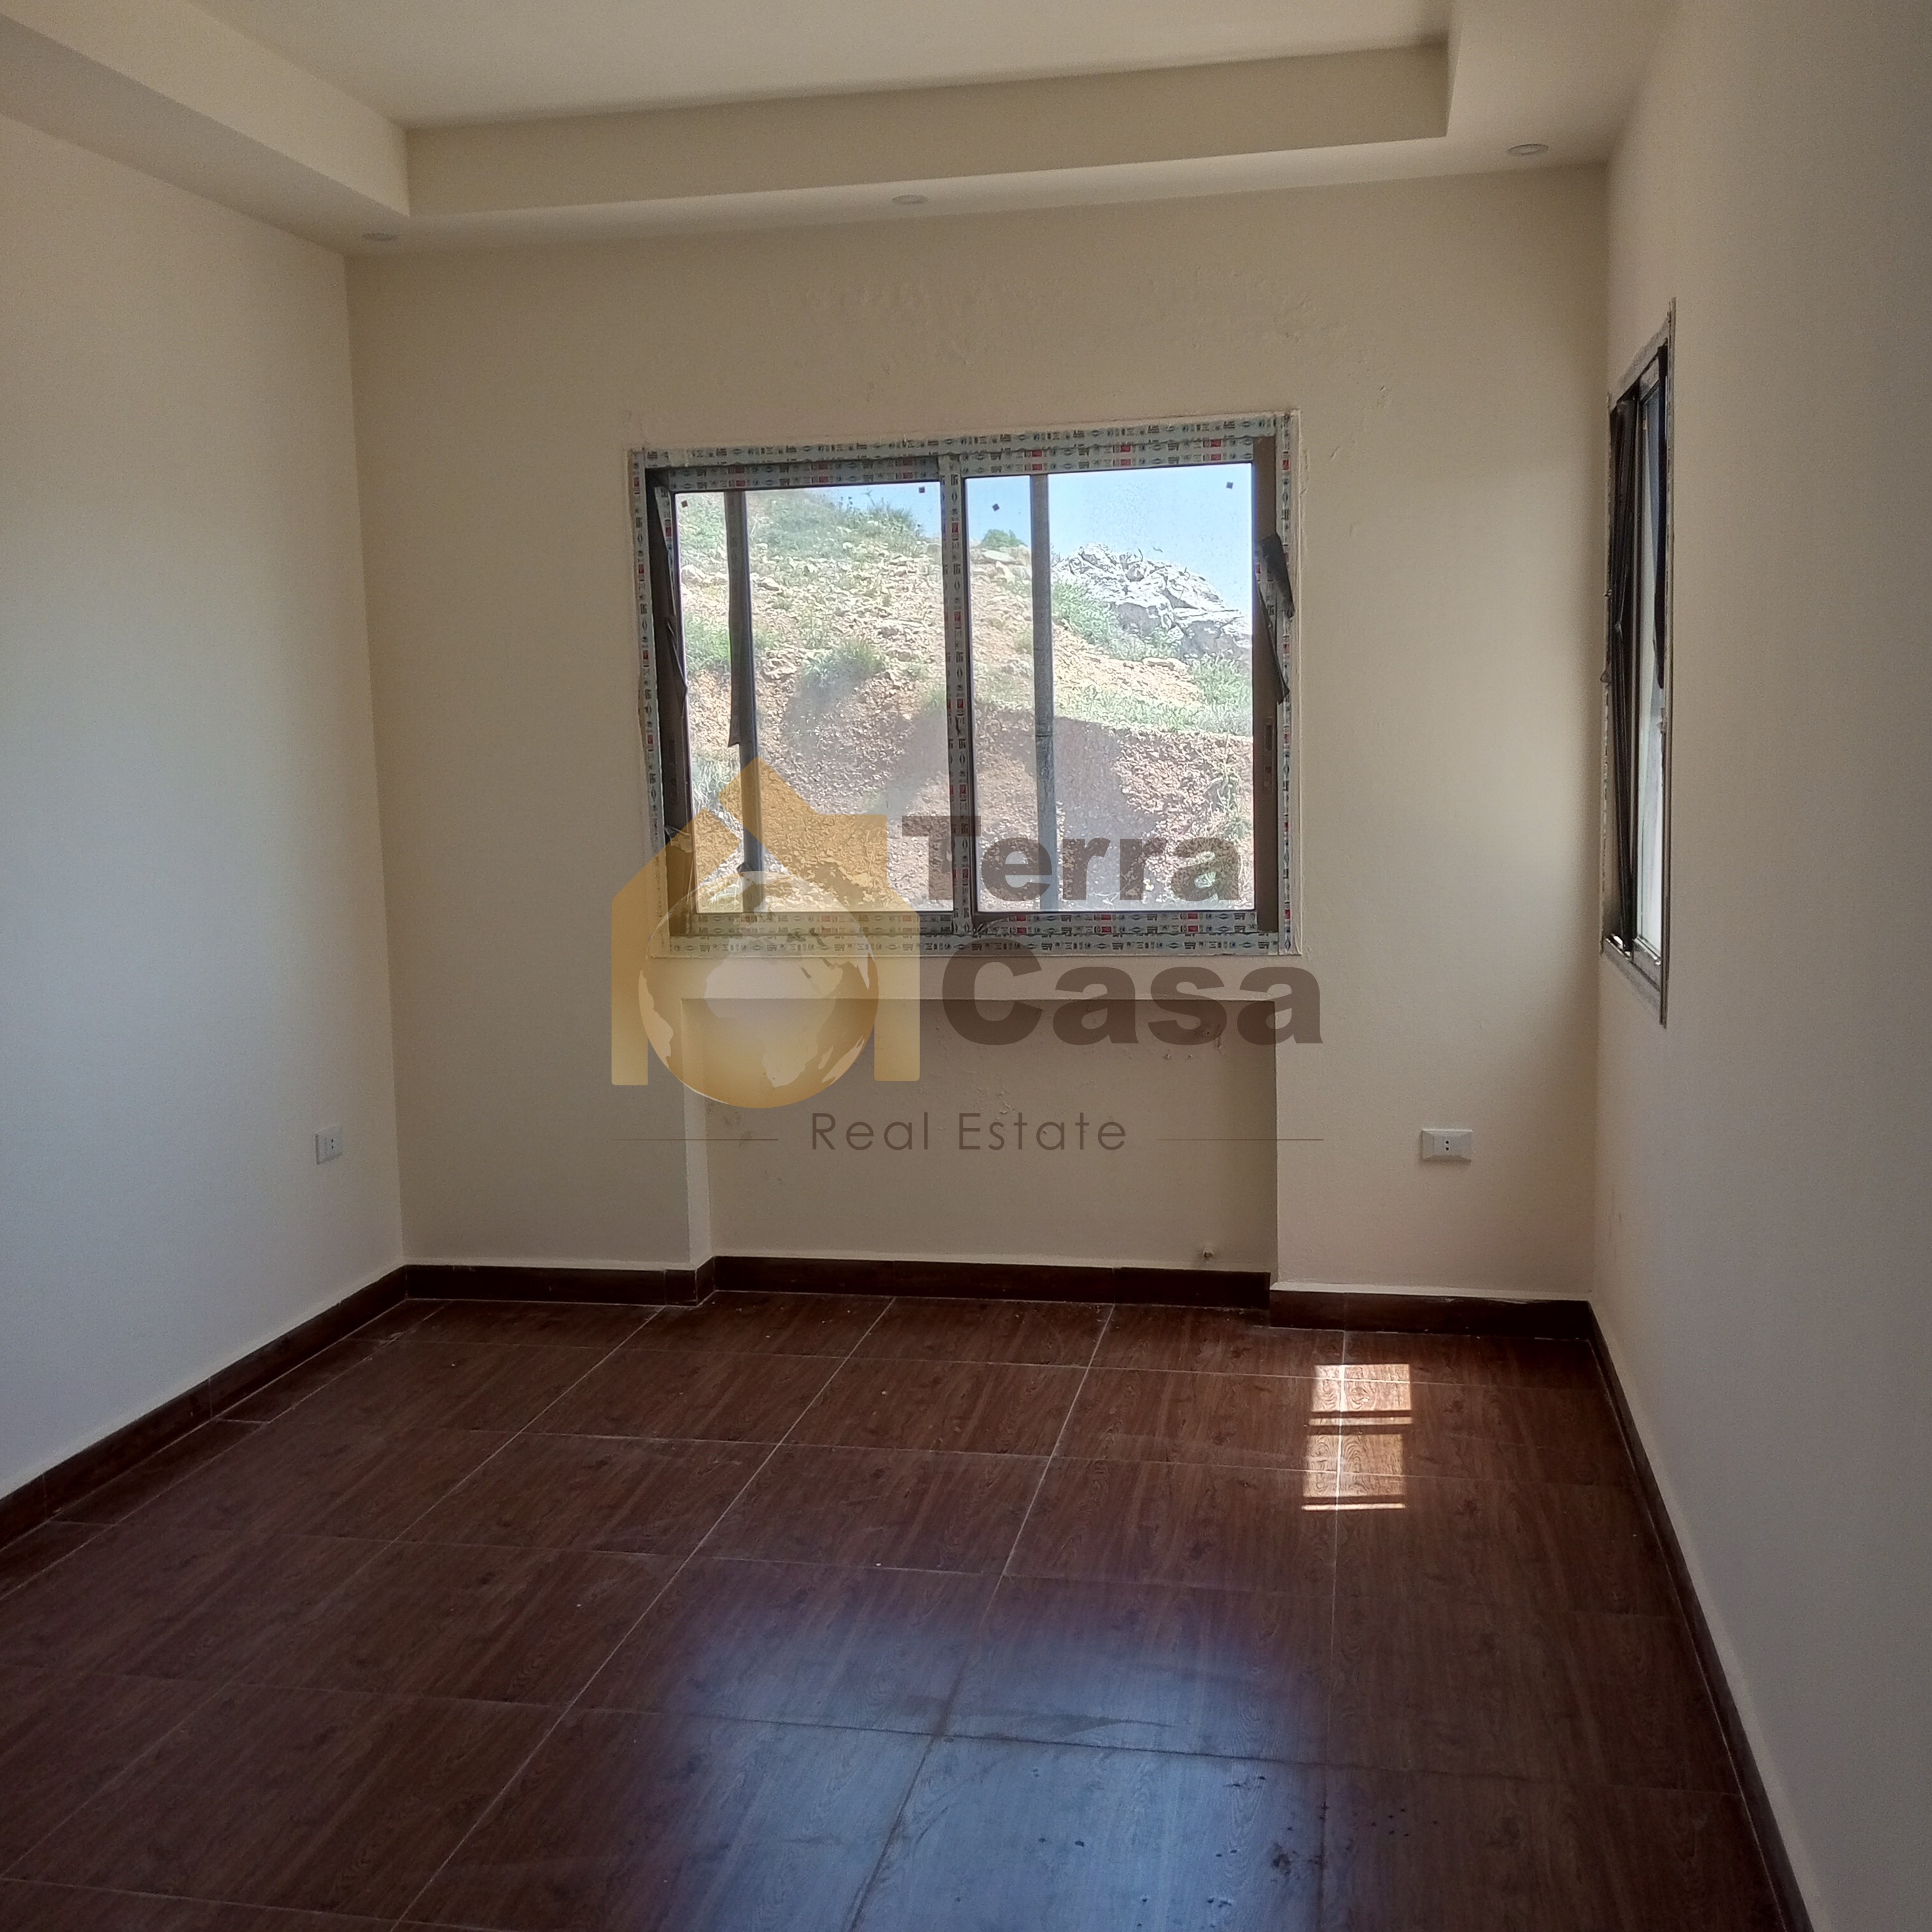 Apartment for sale in zahle qoub elias brand new.